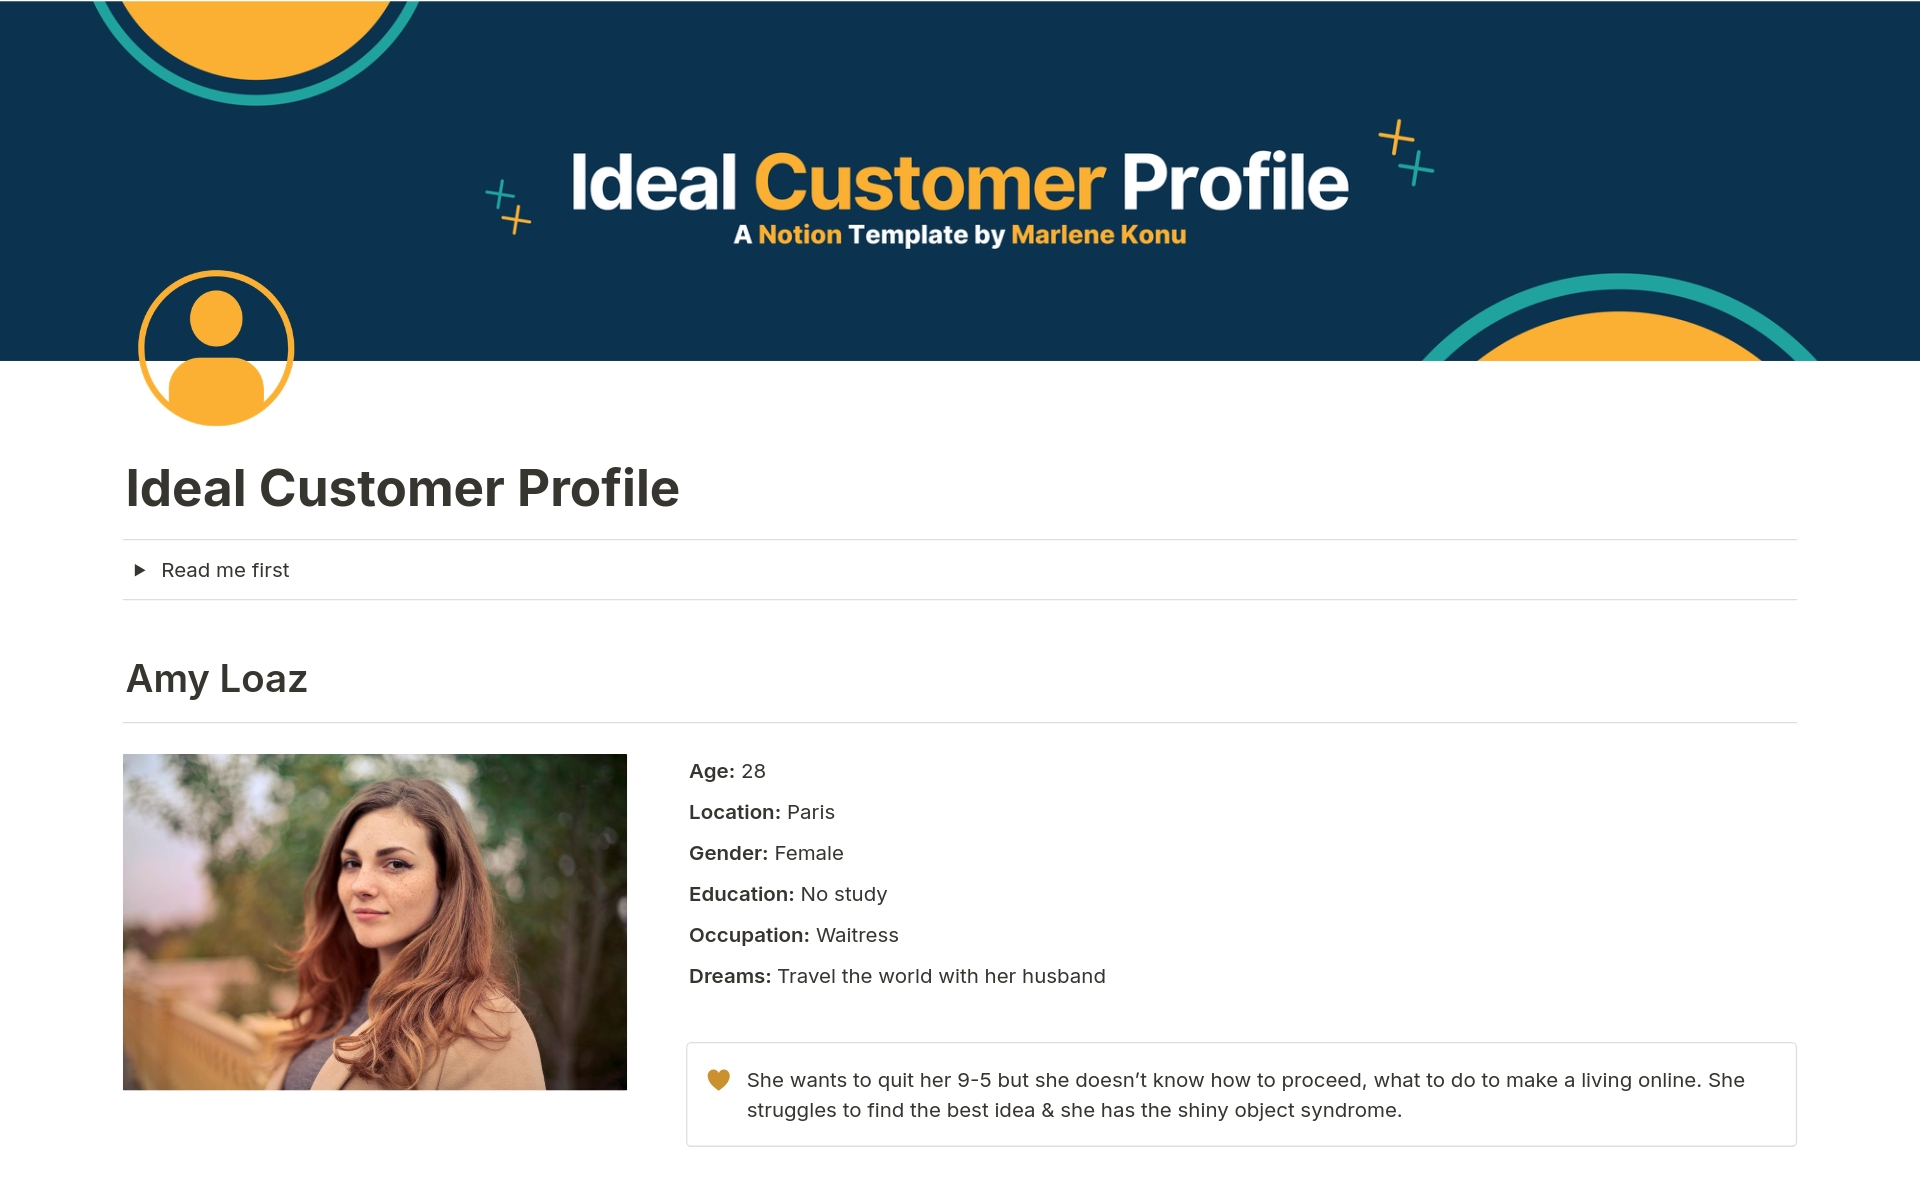 An Ideal Customer Profile is a clear, concise depiction of the type of customer who would benefit most from your product or service. It goes beyond basic demographics to include behaviors, needs, and pain points, giving you a laser-focused view of your most valuable customers.